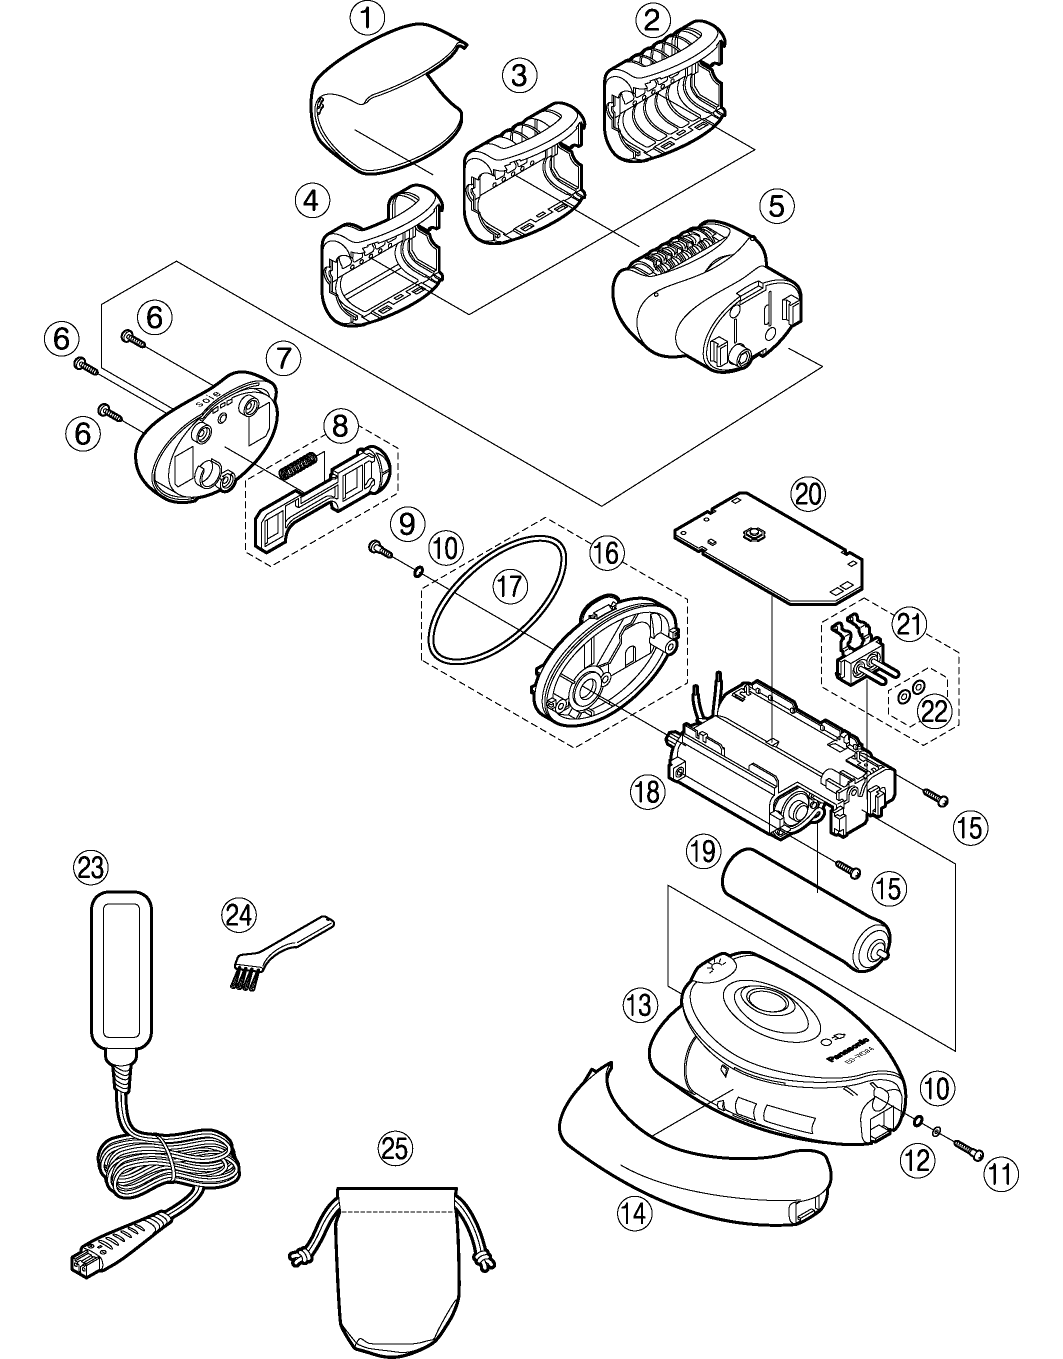 ES-WD24: Exploded View